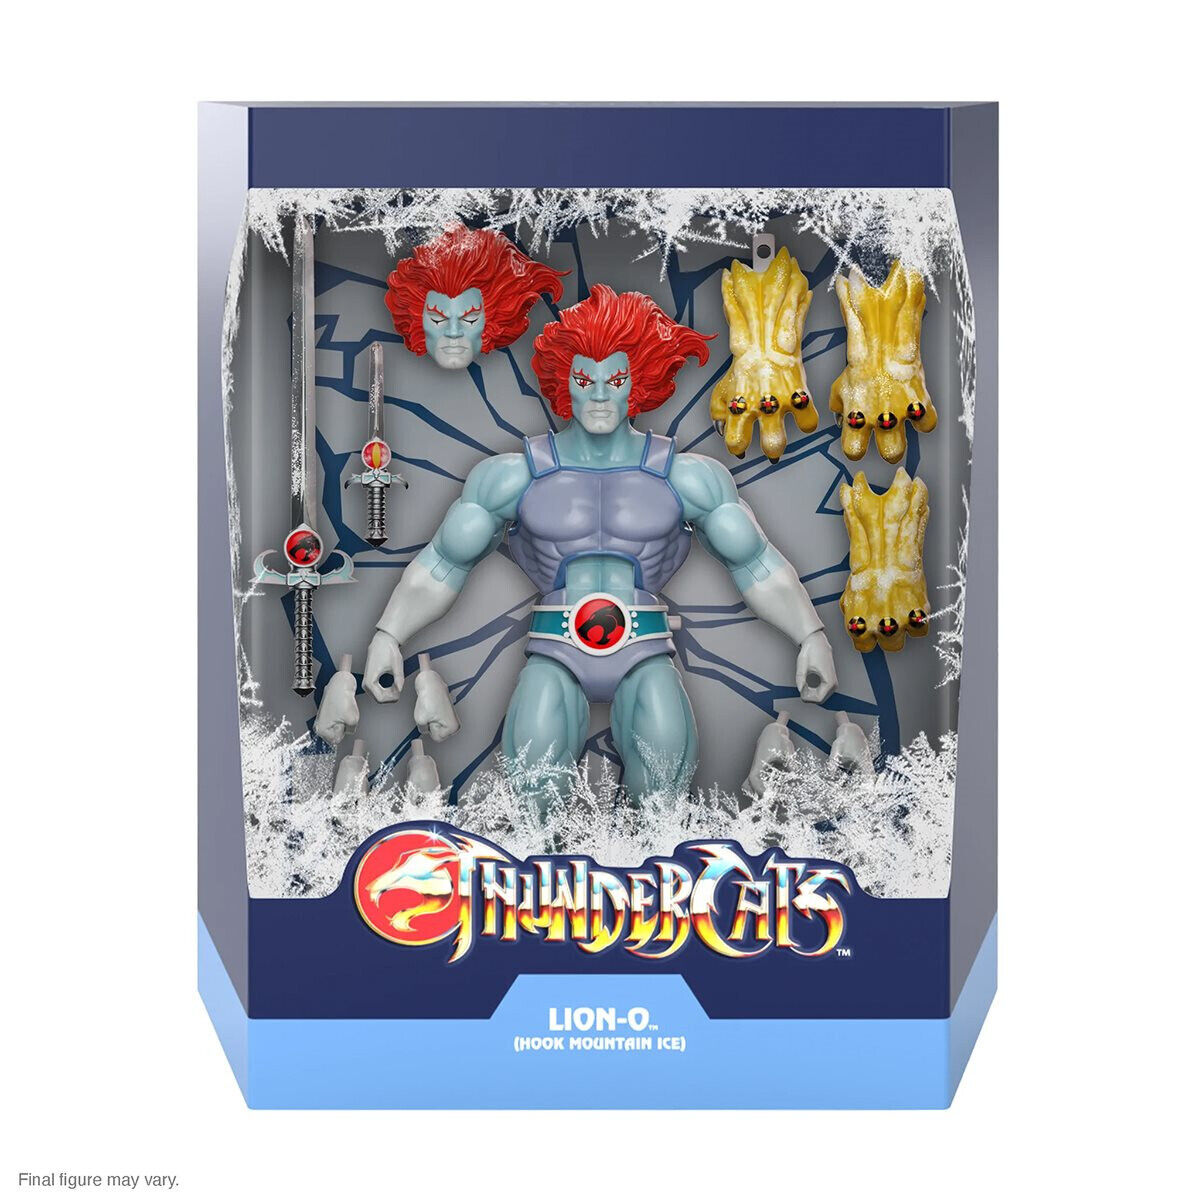 ThunderCats K Ultimates Lion-O 7-Inch Action Figure (Hook Mountain Ice) w/Acc